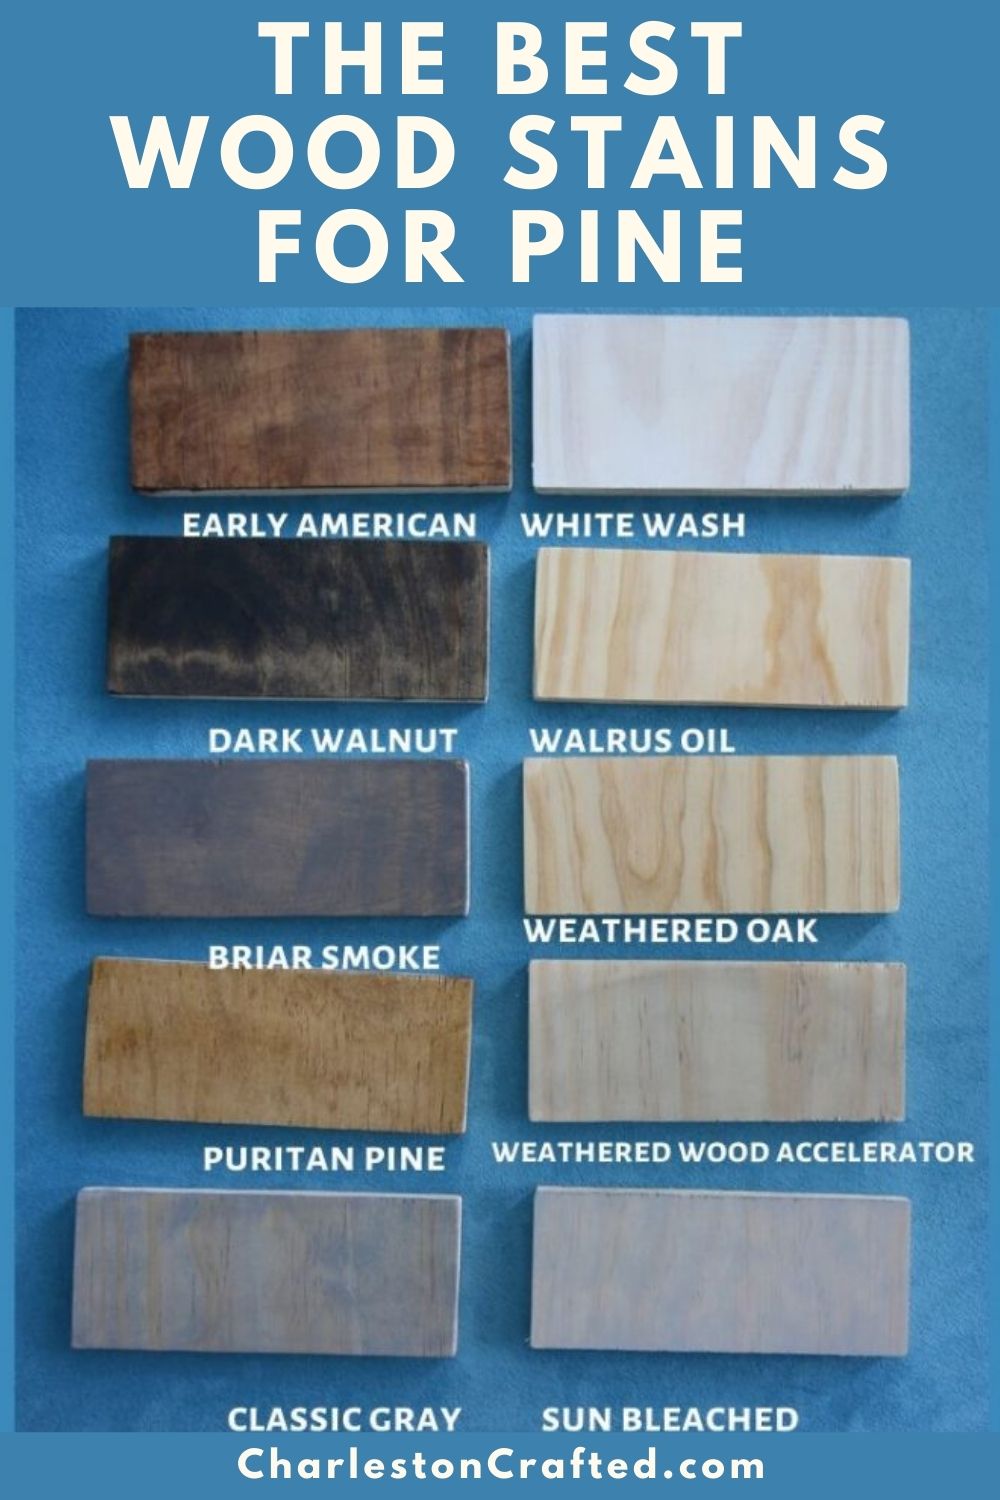 The Best Wood Stains On Pine